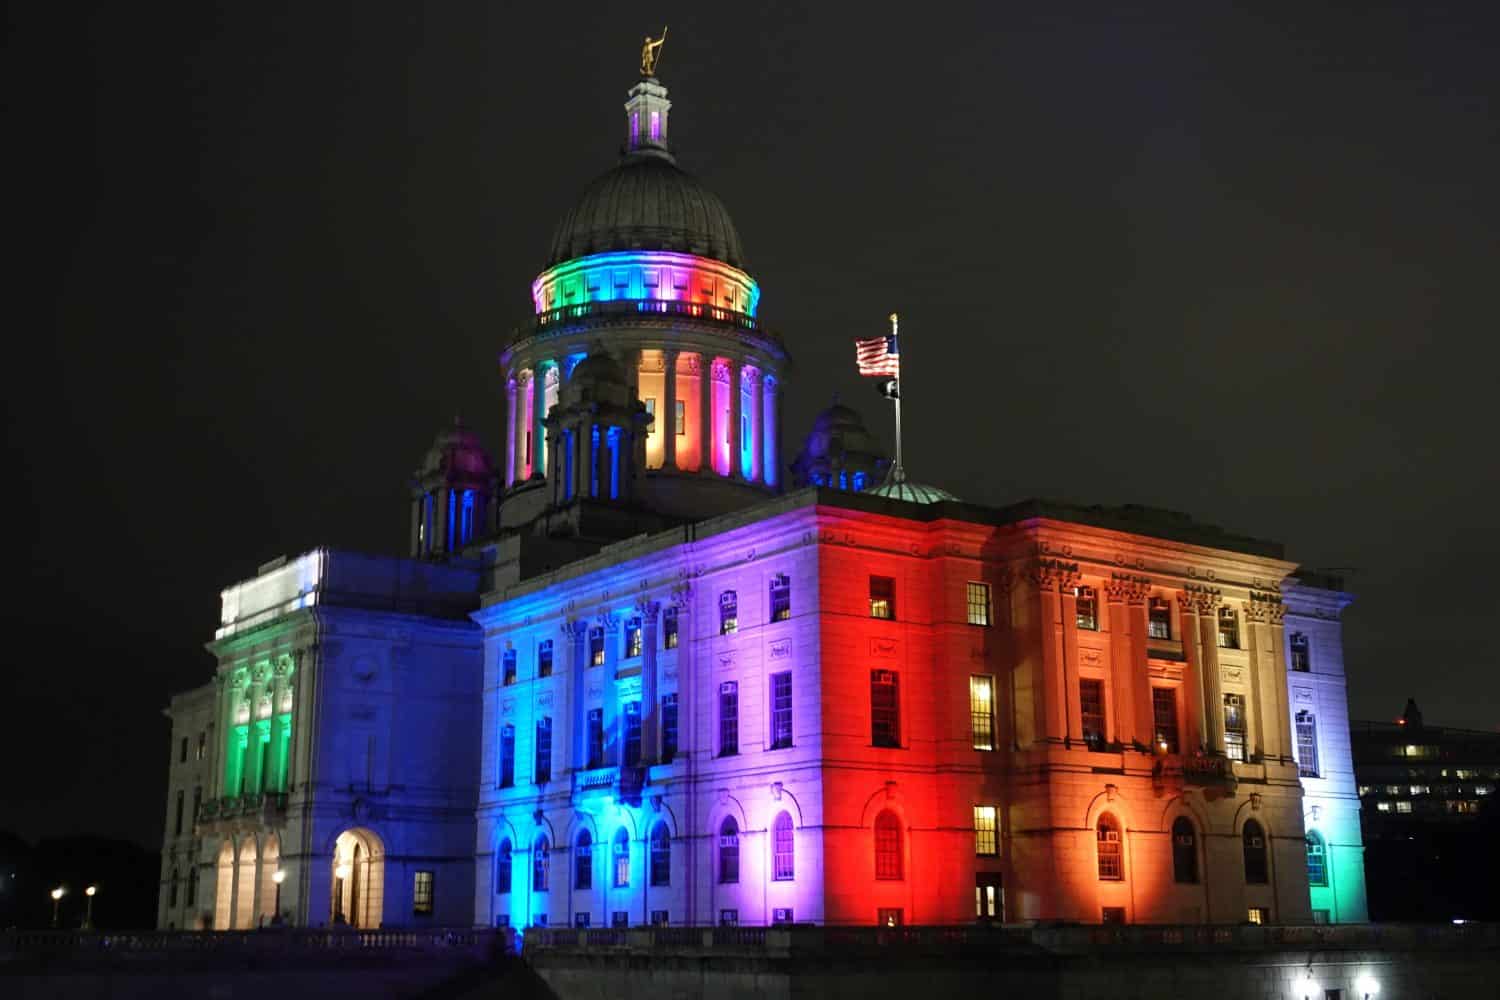 The illuminated Rhode Island State House capitol building in Providence, RI